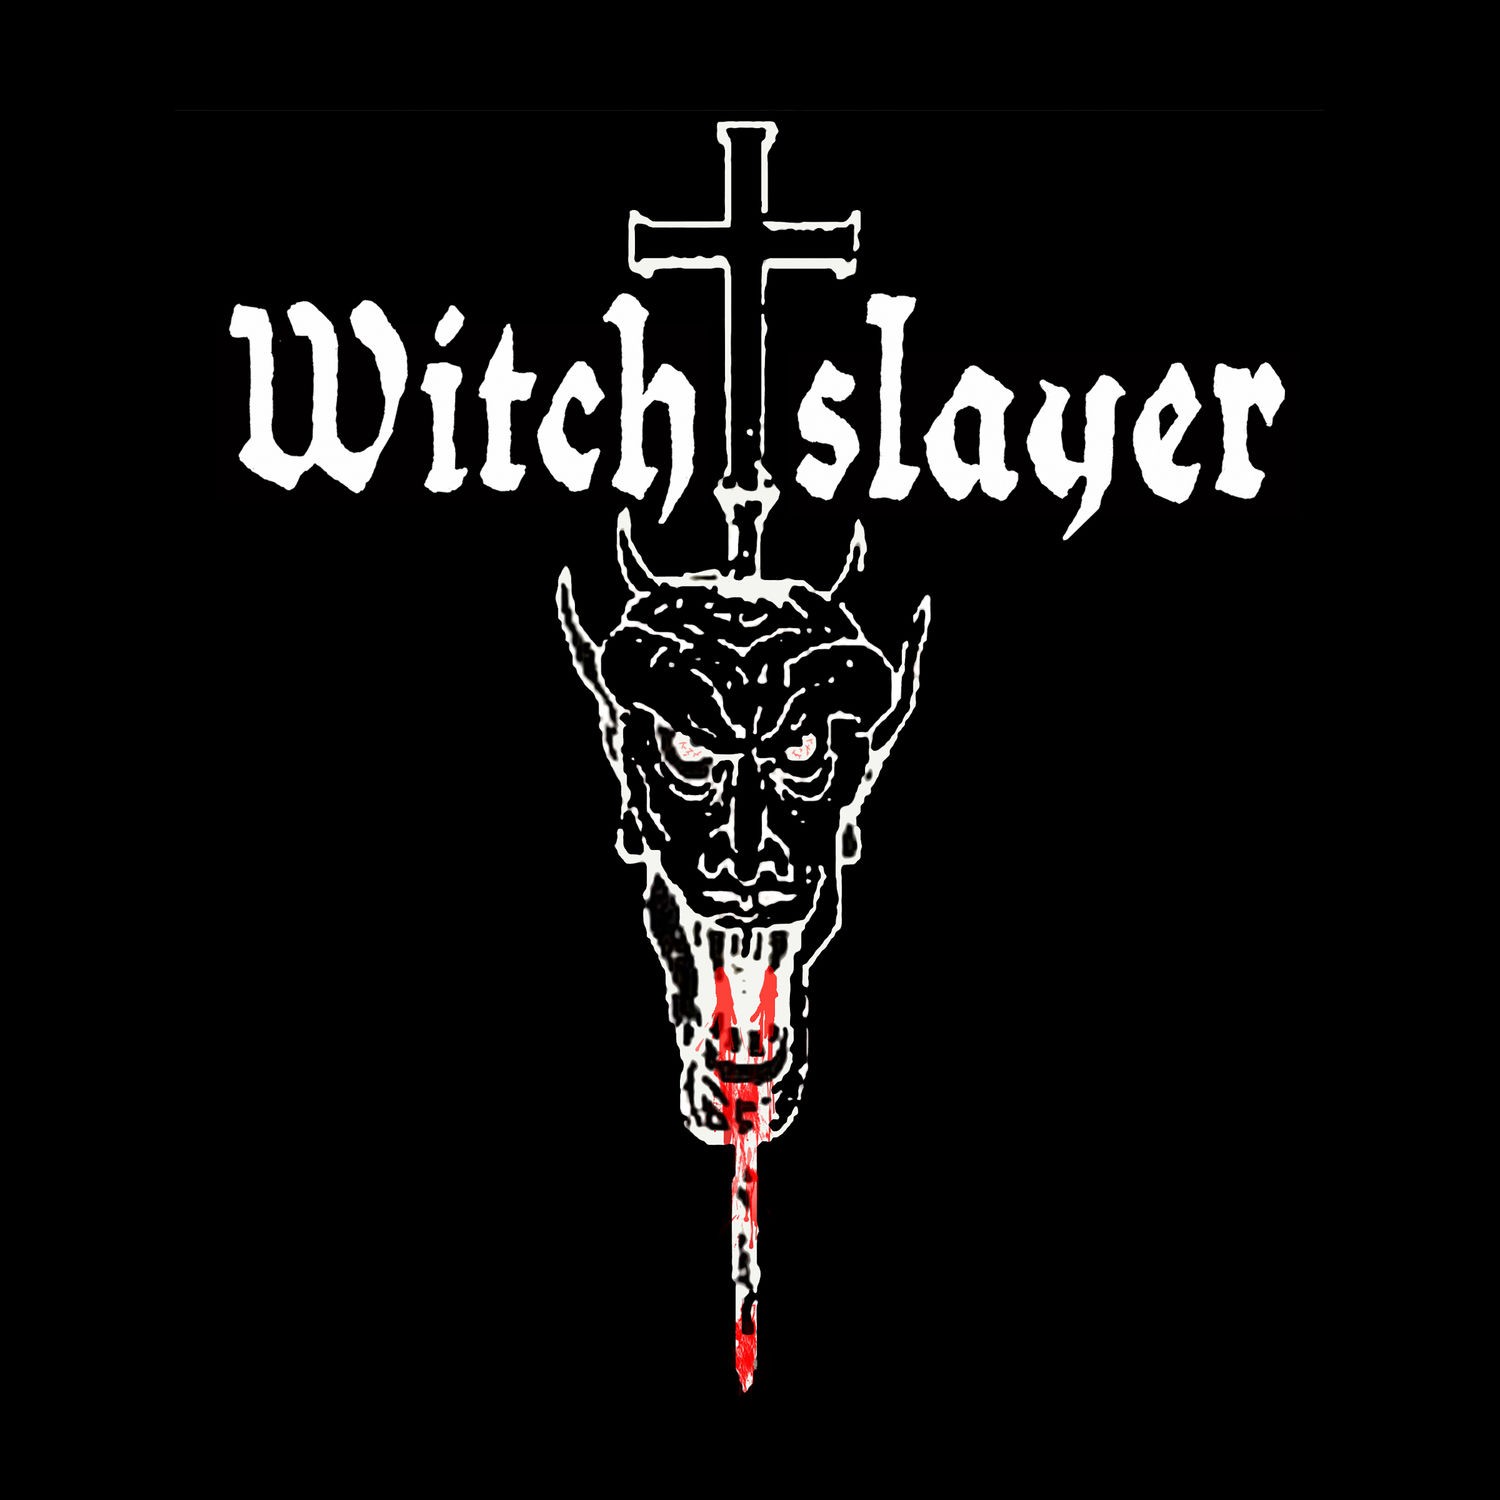 Witchslayer – Witchslayer (2022) MP3 320kbps